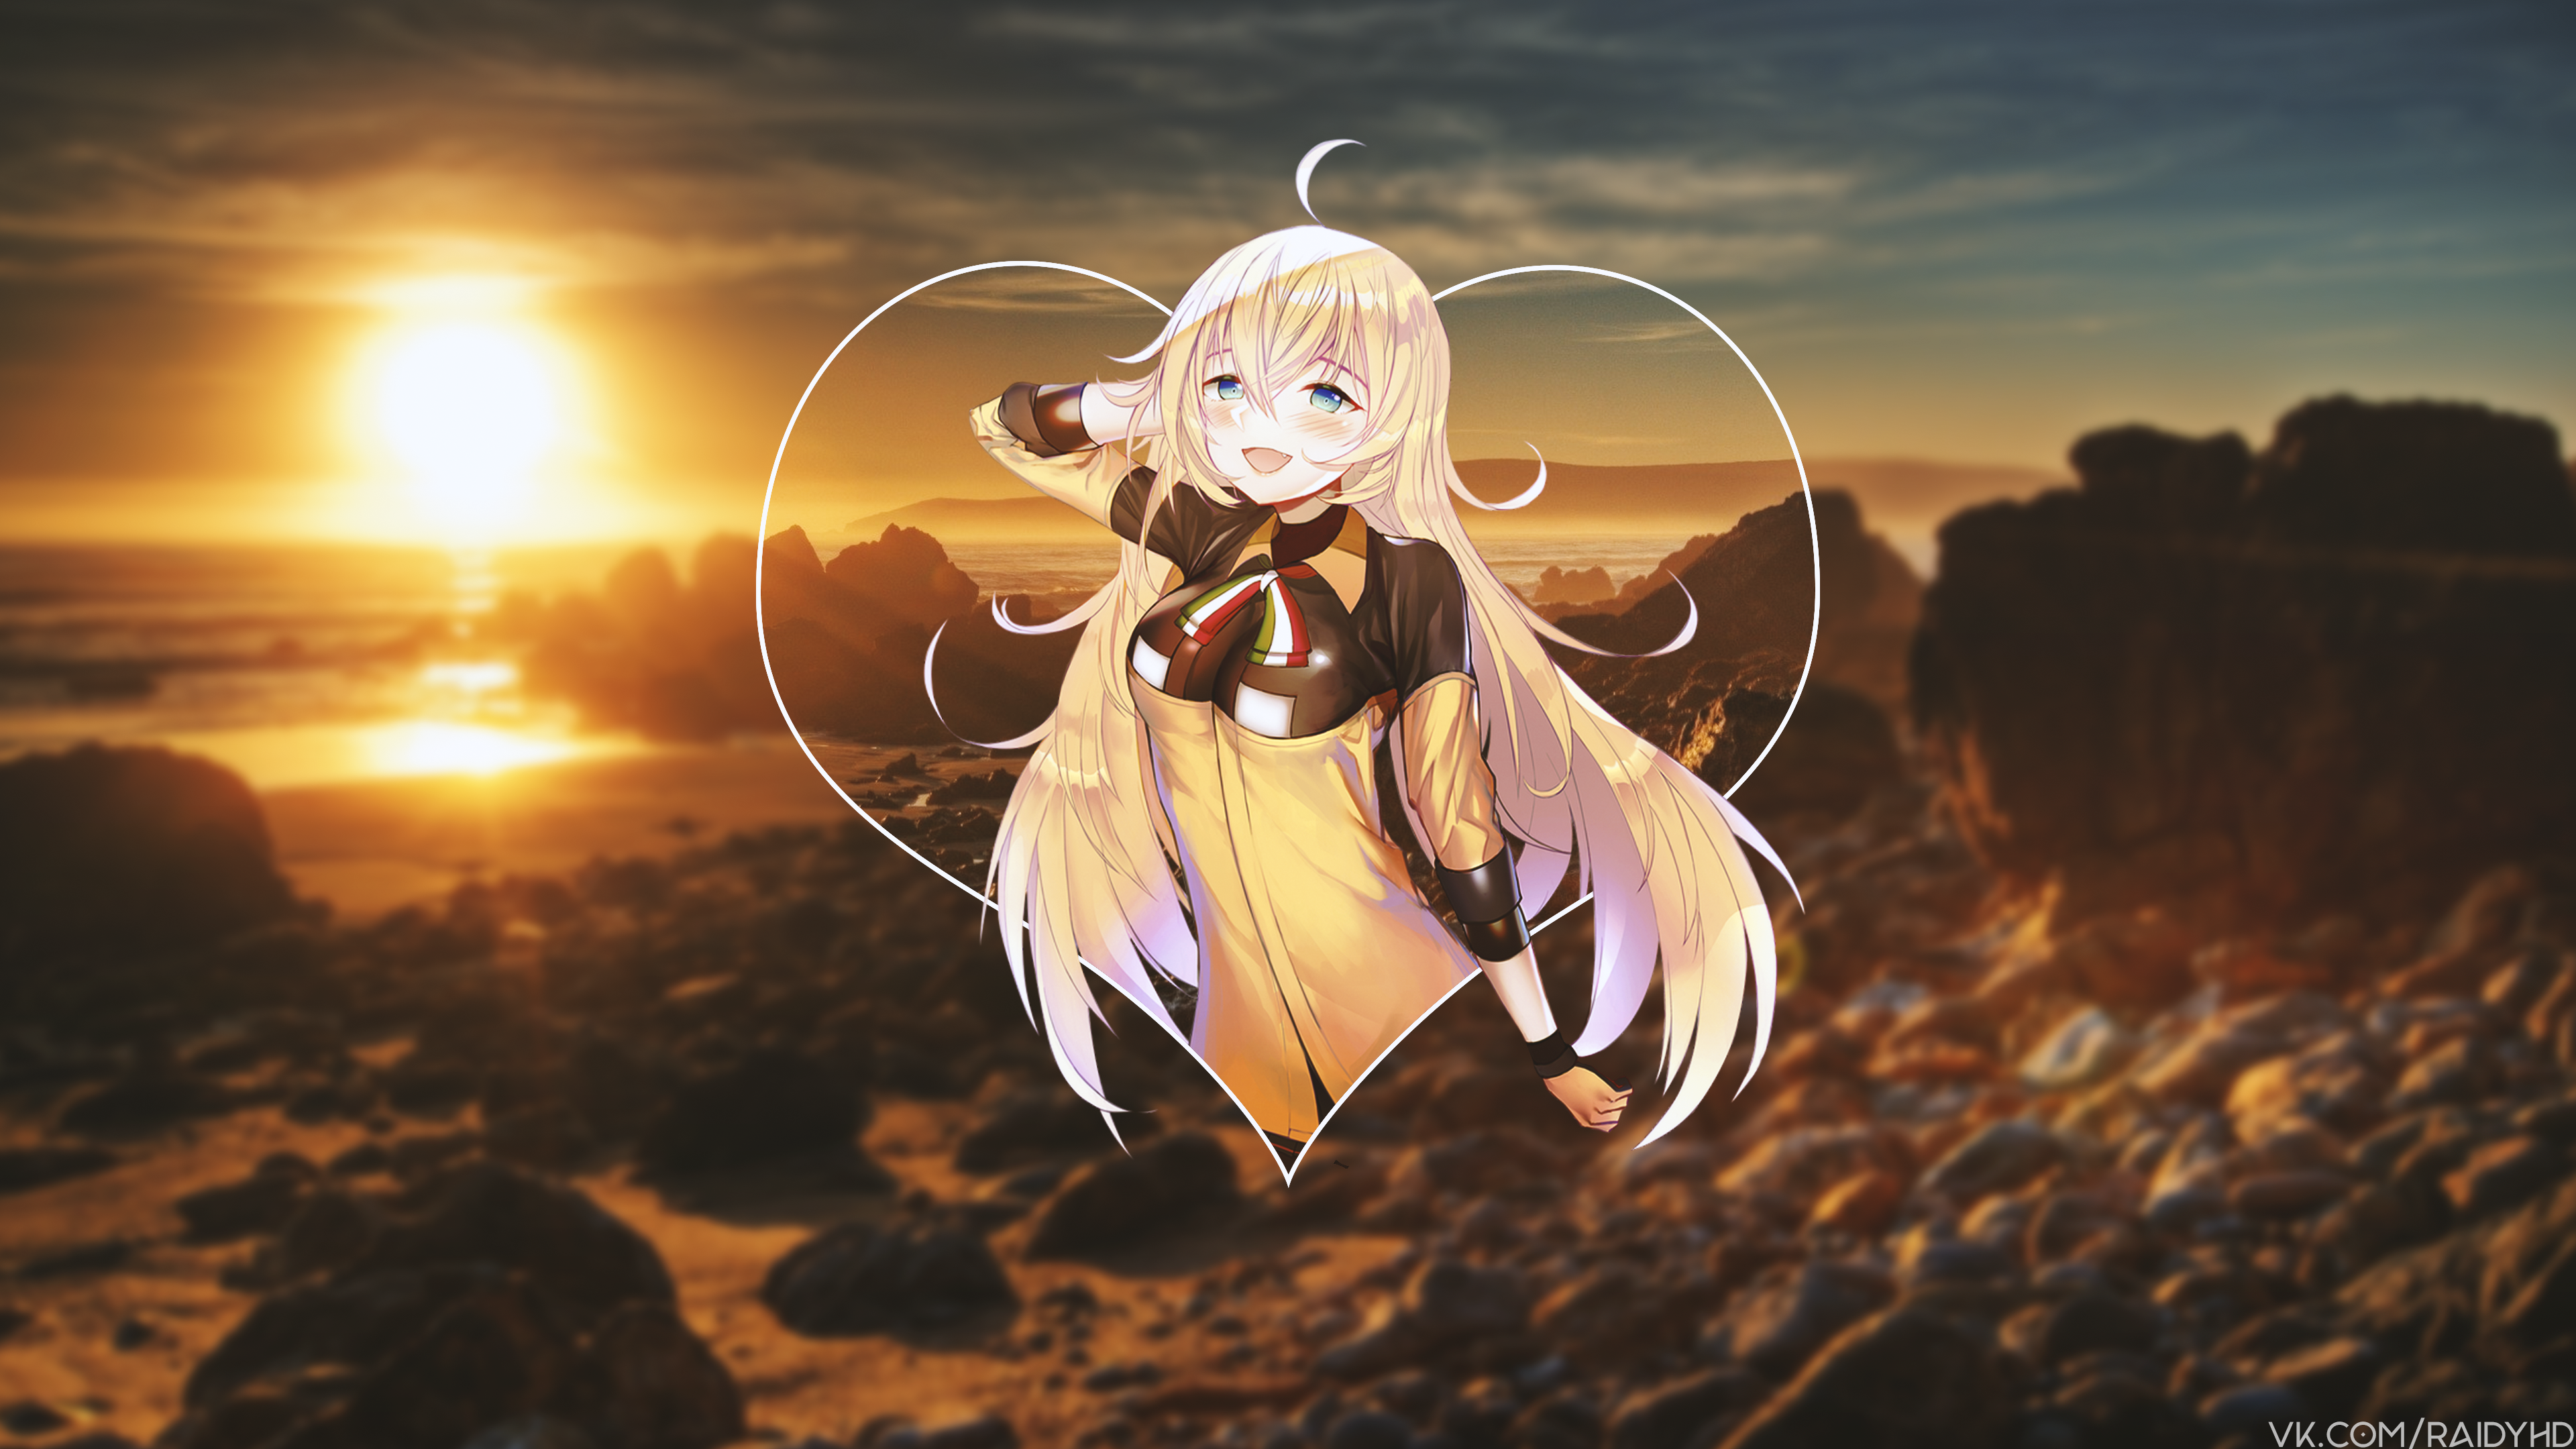 Anime 3840x2160 anime anime girls picture-in-picture sunset